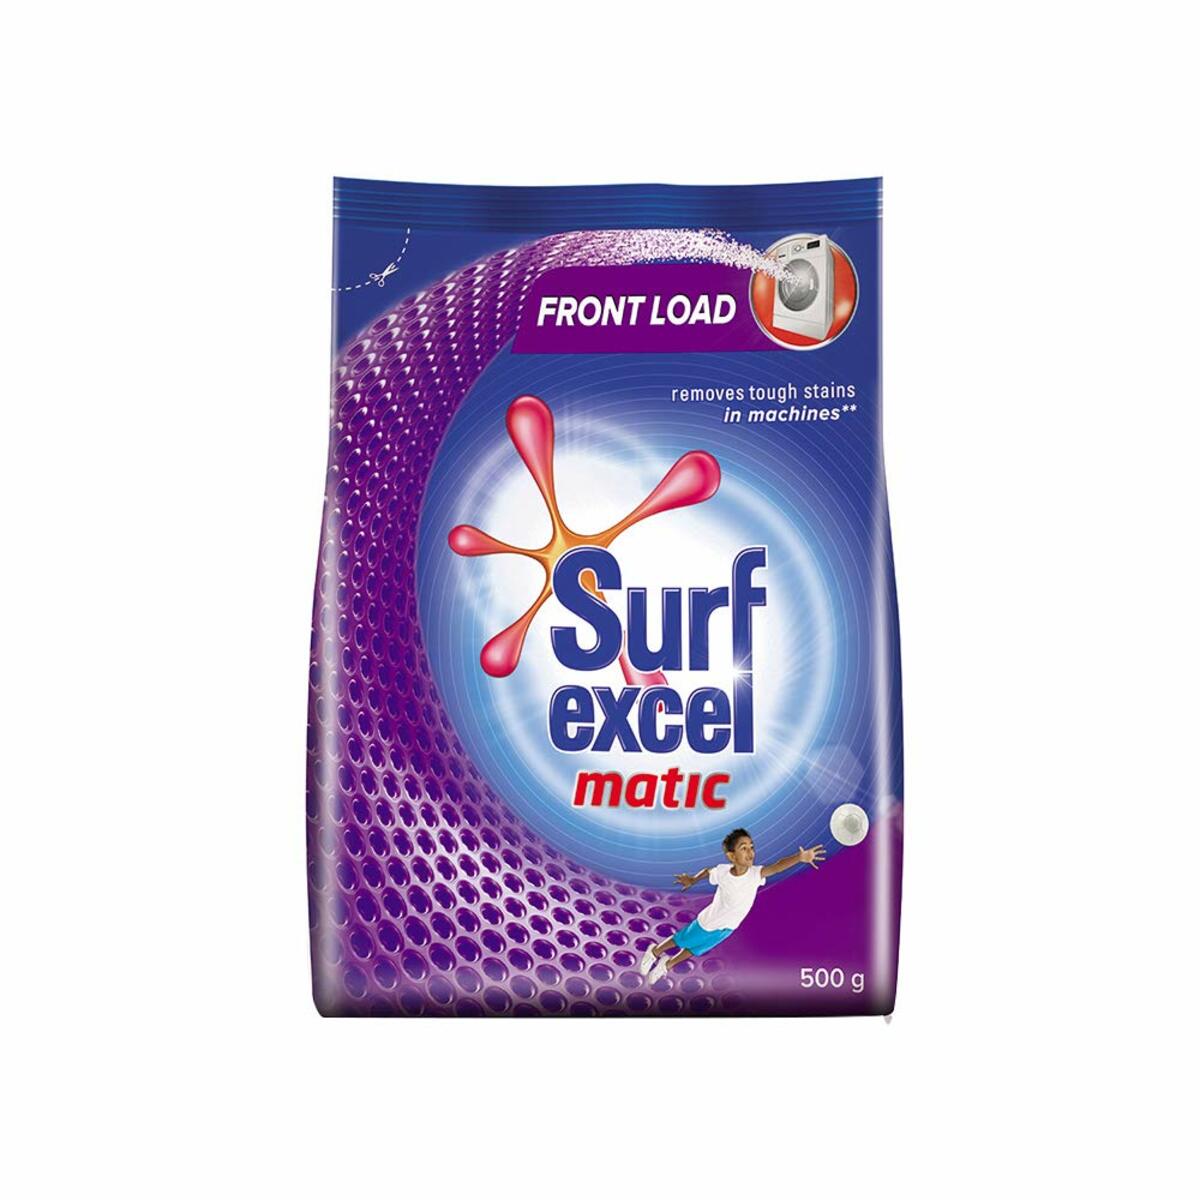 Surf Excel Matic Front Load 500g